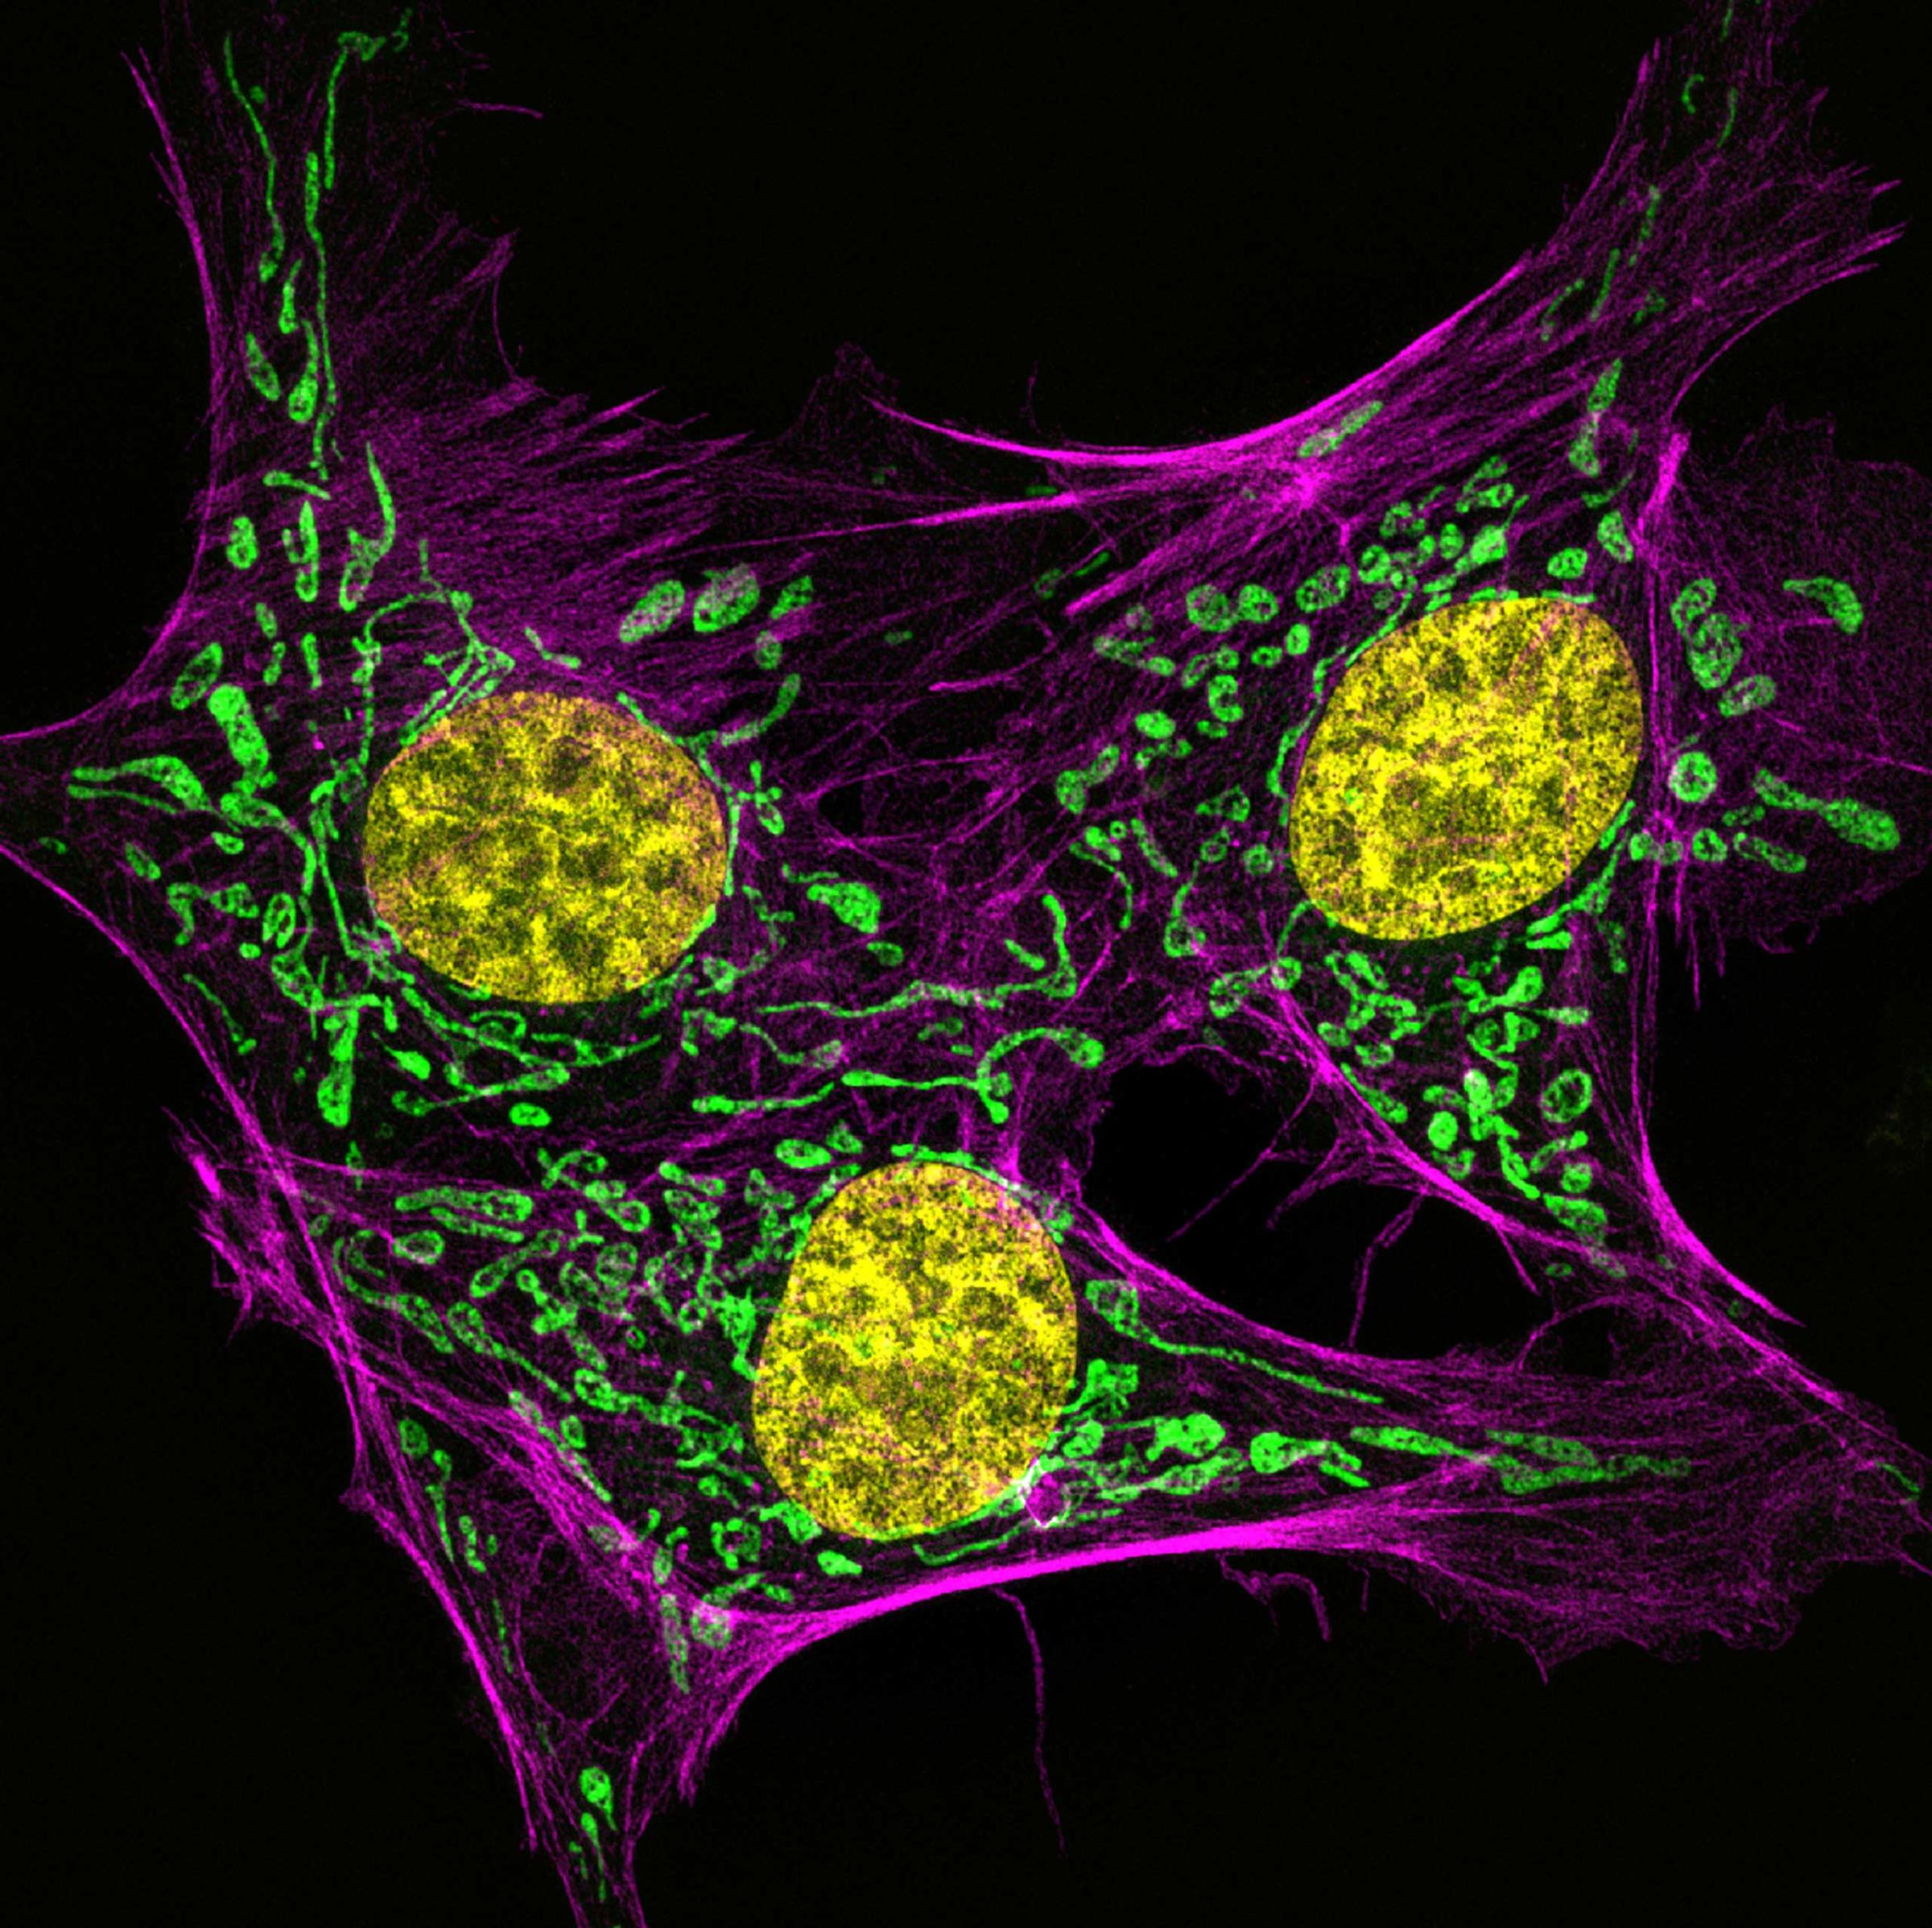 Bovine pulmonary artery endothelial cells stained for actin (pink), mitochondria (green) and DNA (yellow